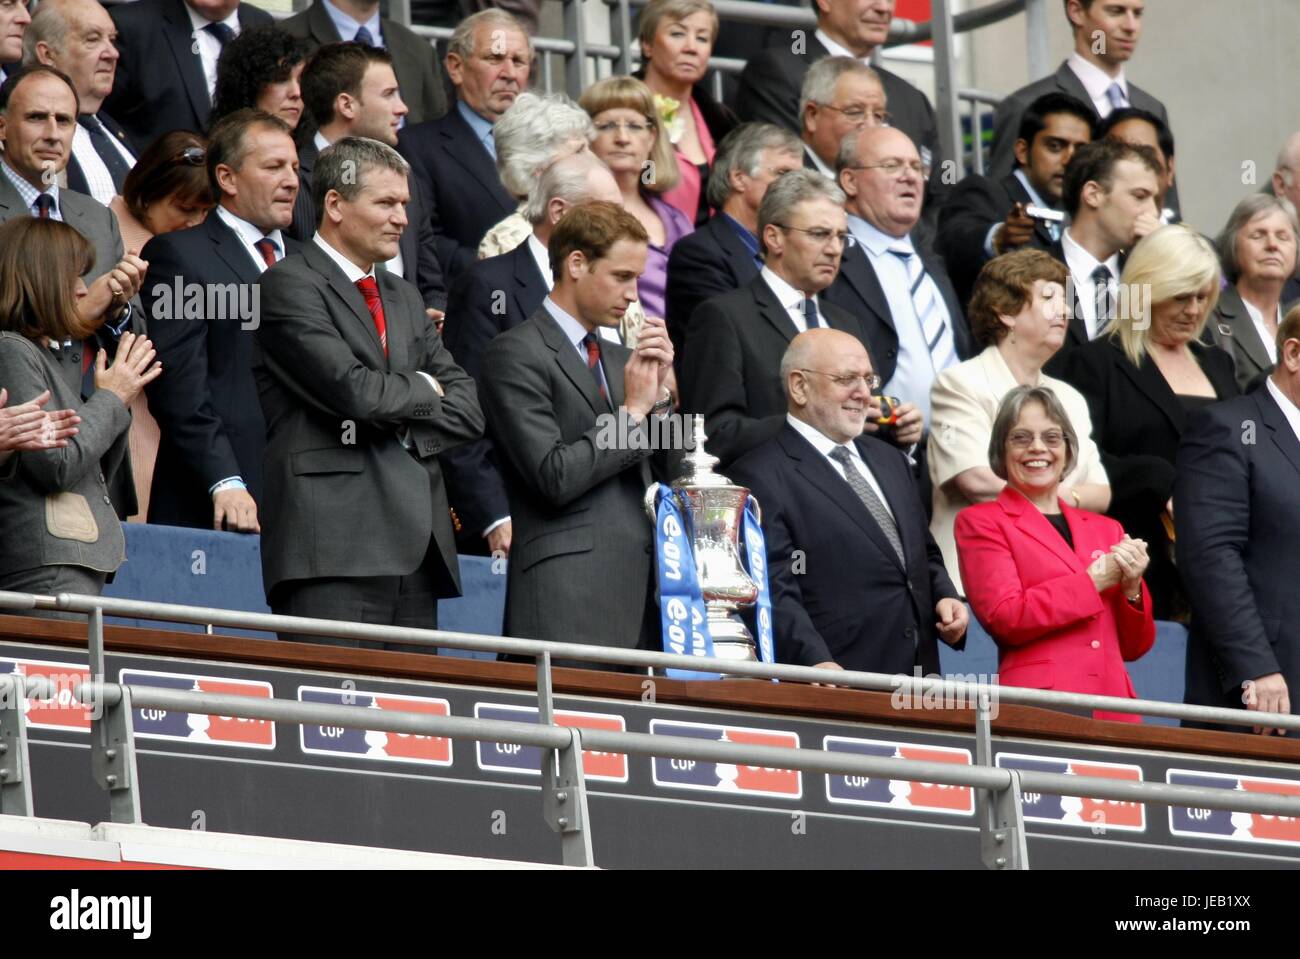 PRINCE WILLIAM & FA CUP CHELSEA V MANCHESTER UNITED WEMBLEY STADIUM LONDON ENGLAND 19 May 2007 Stock Photo